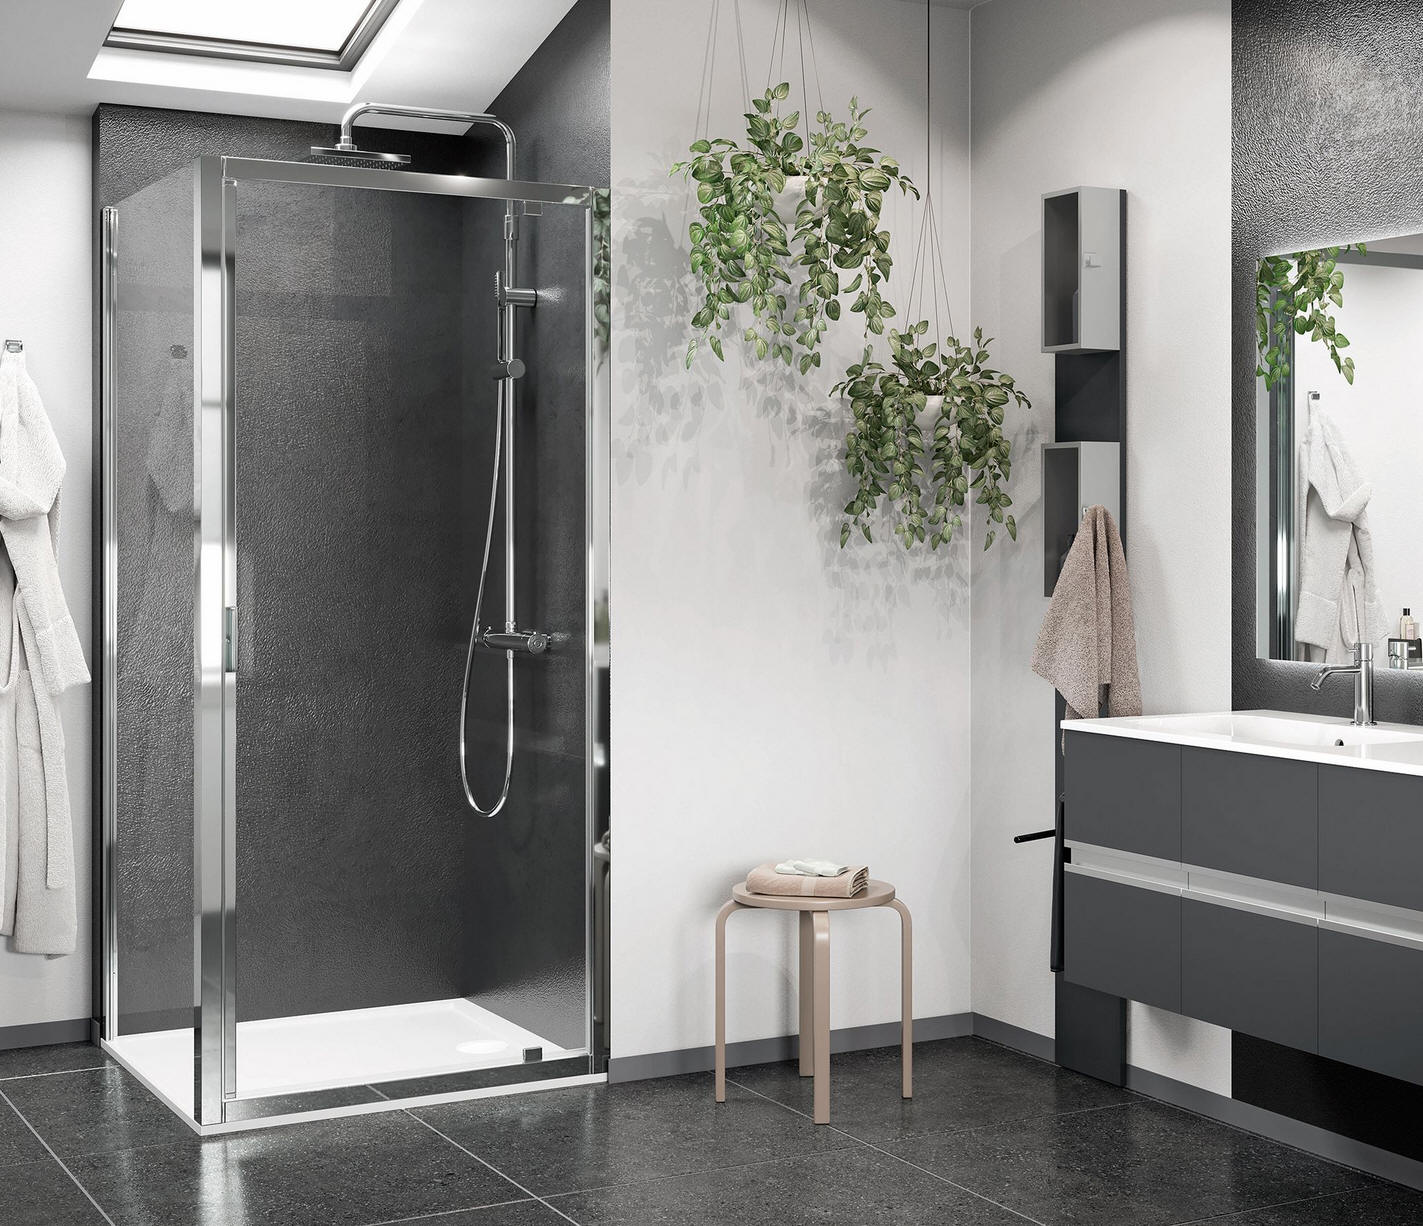 LUNES 2.0 G pivot shower door shown with fixed side panel (F) in a bathroom setting.